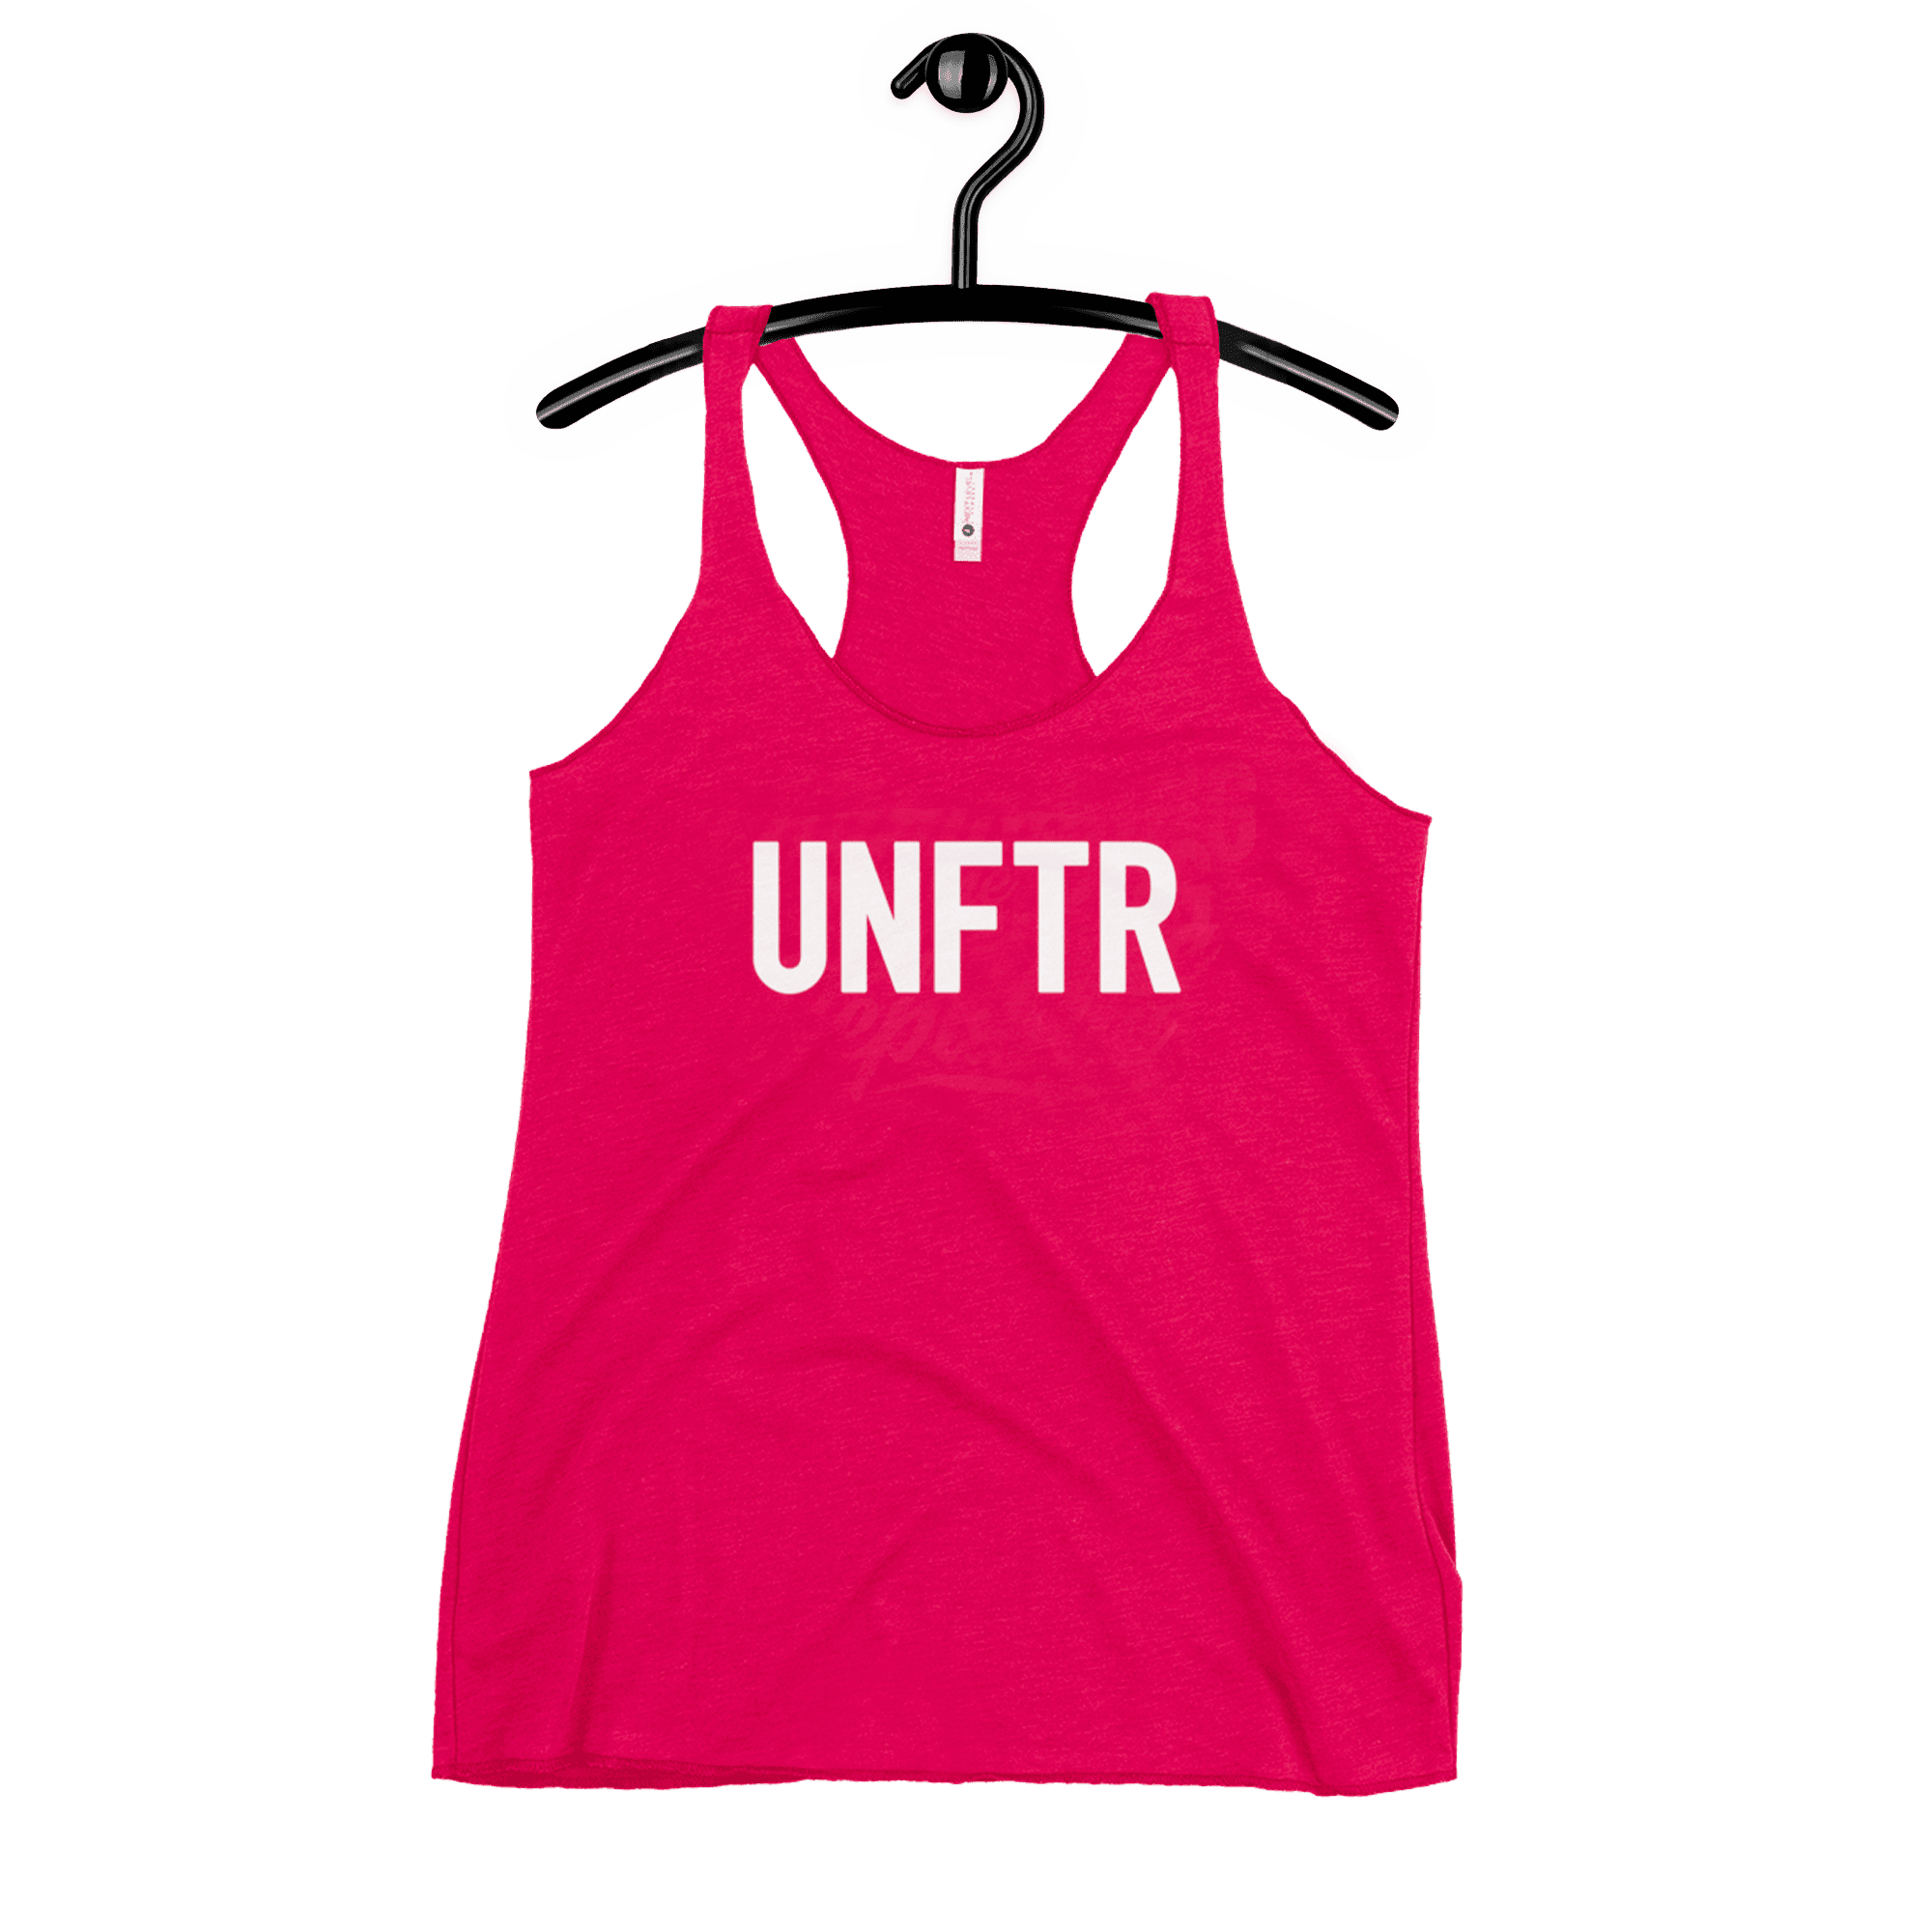 Fitted Tank top in bright pink with White UNFTR logo on the chest